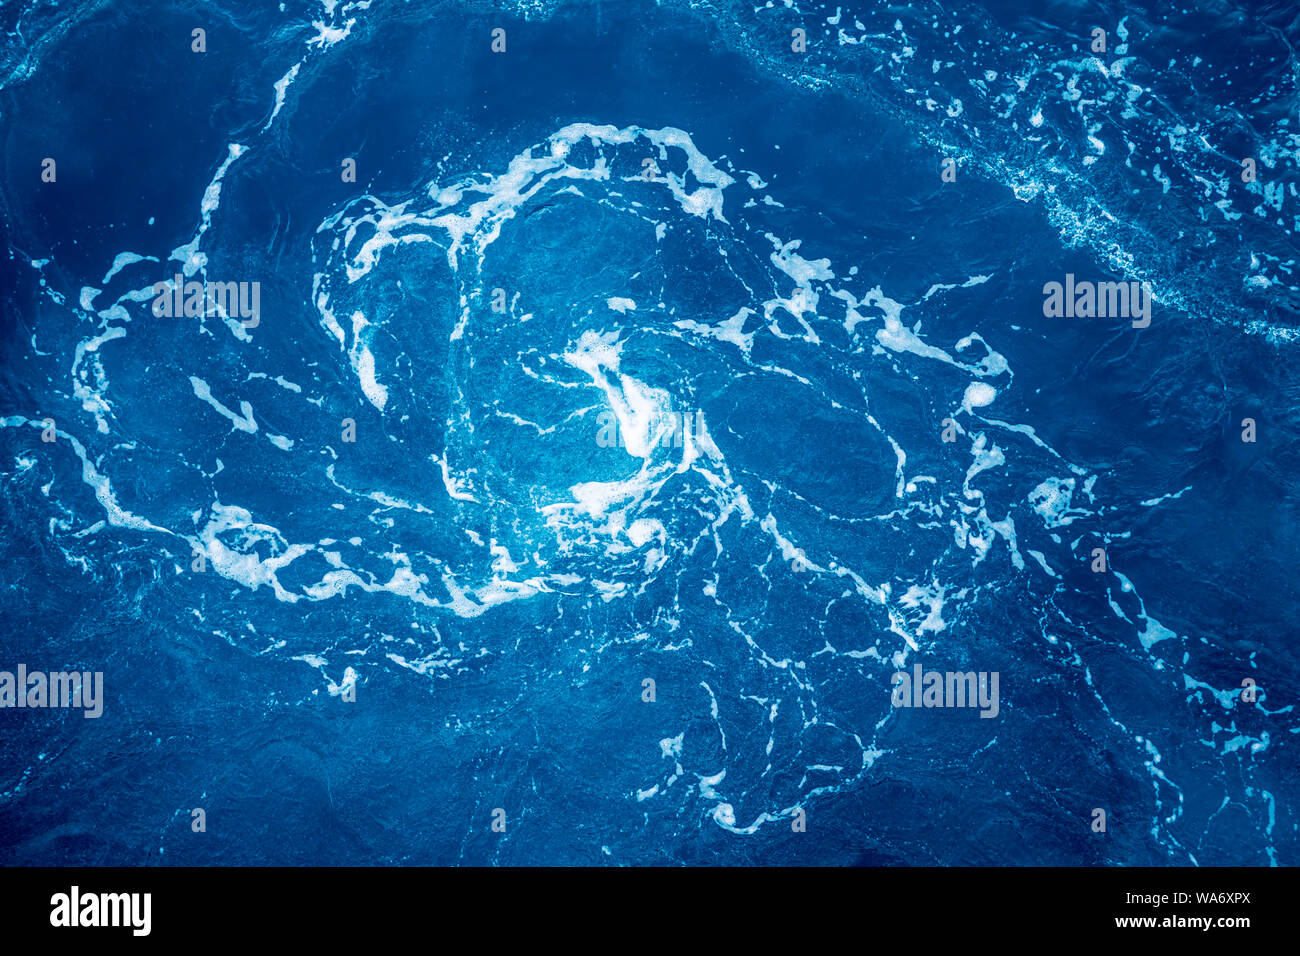 Vortex with foam in the ocean made by turning ship. Stock Photo